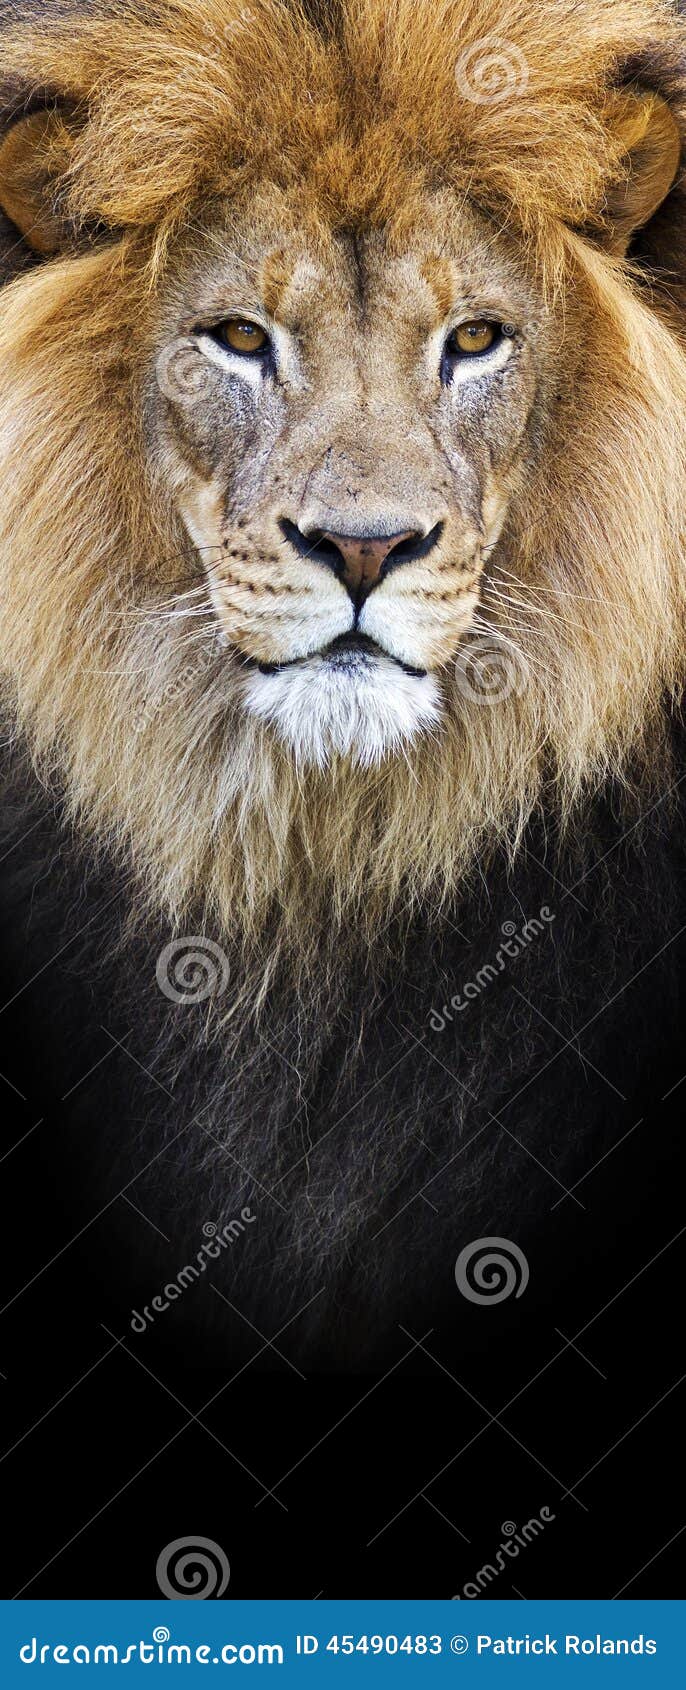 Male African lion banner stock image. Image of black - 45490483